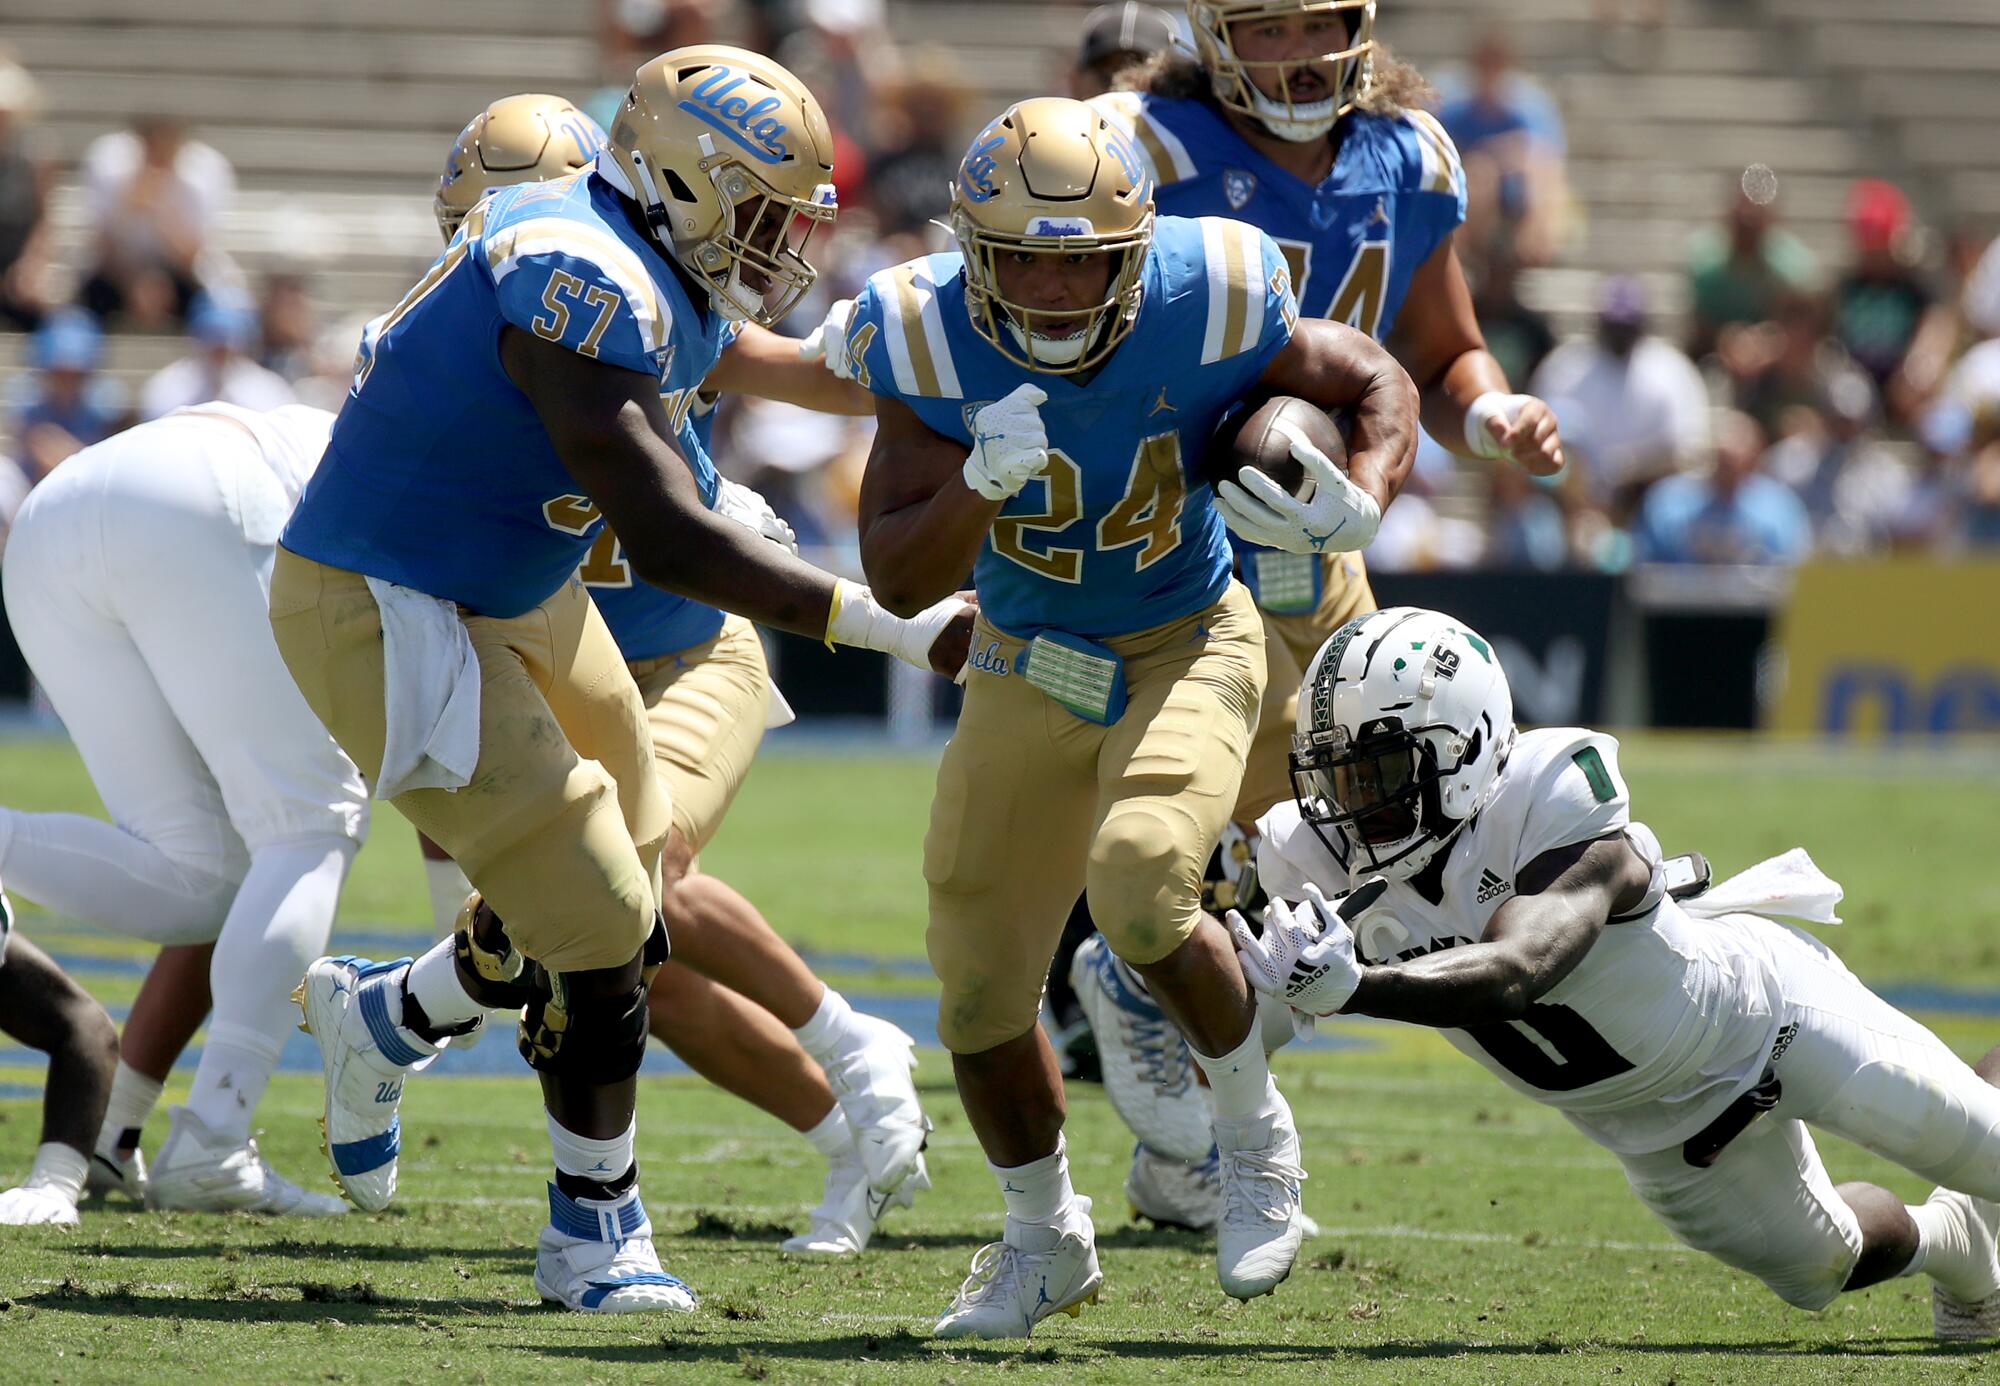 UCLA running back Zach Charbonnet breaks free for a touchdown run against Hawaii in the first quarter.